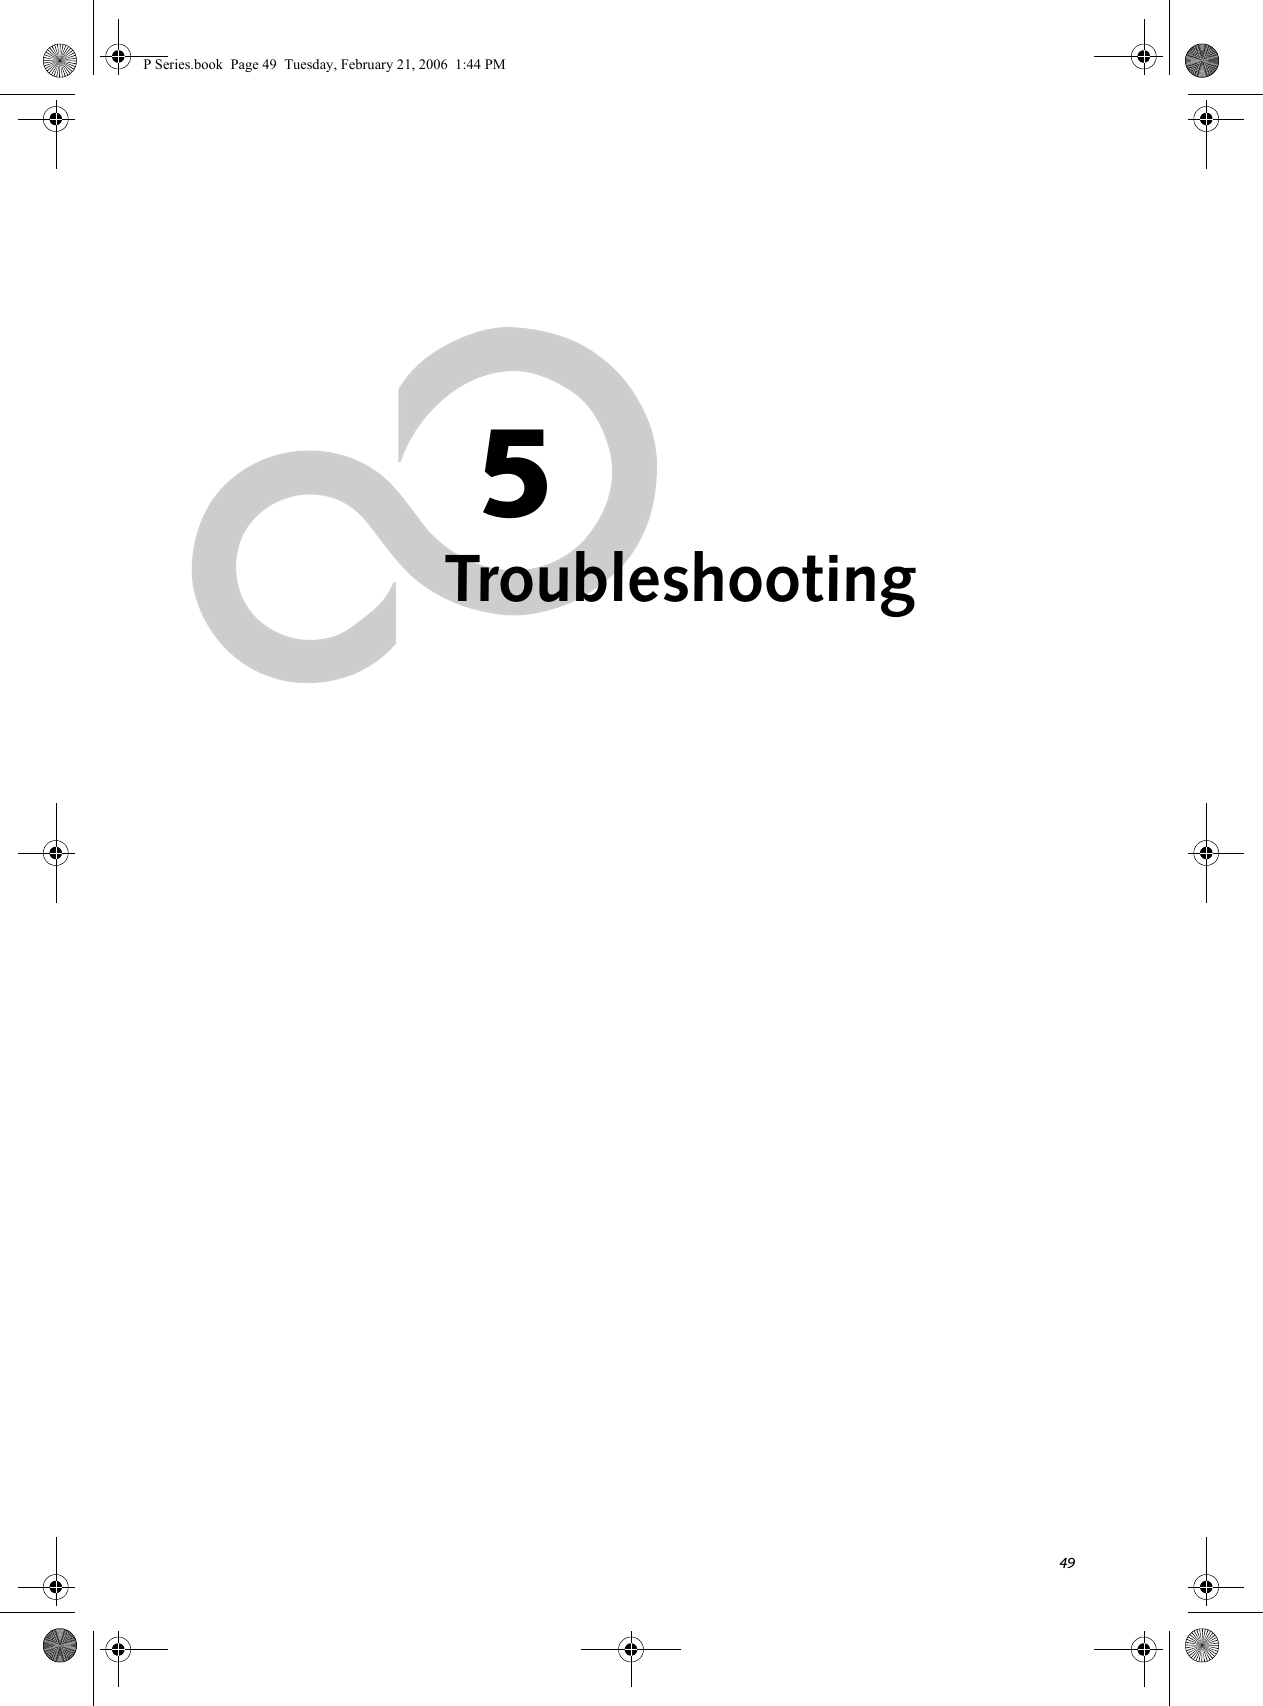 495TroubleshootingP Series.book  Page 49  Tuesday, February 21, 2006  1:44 PM